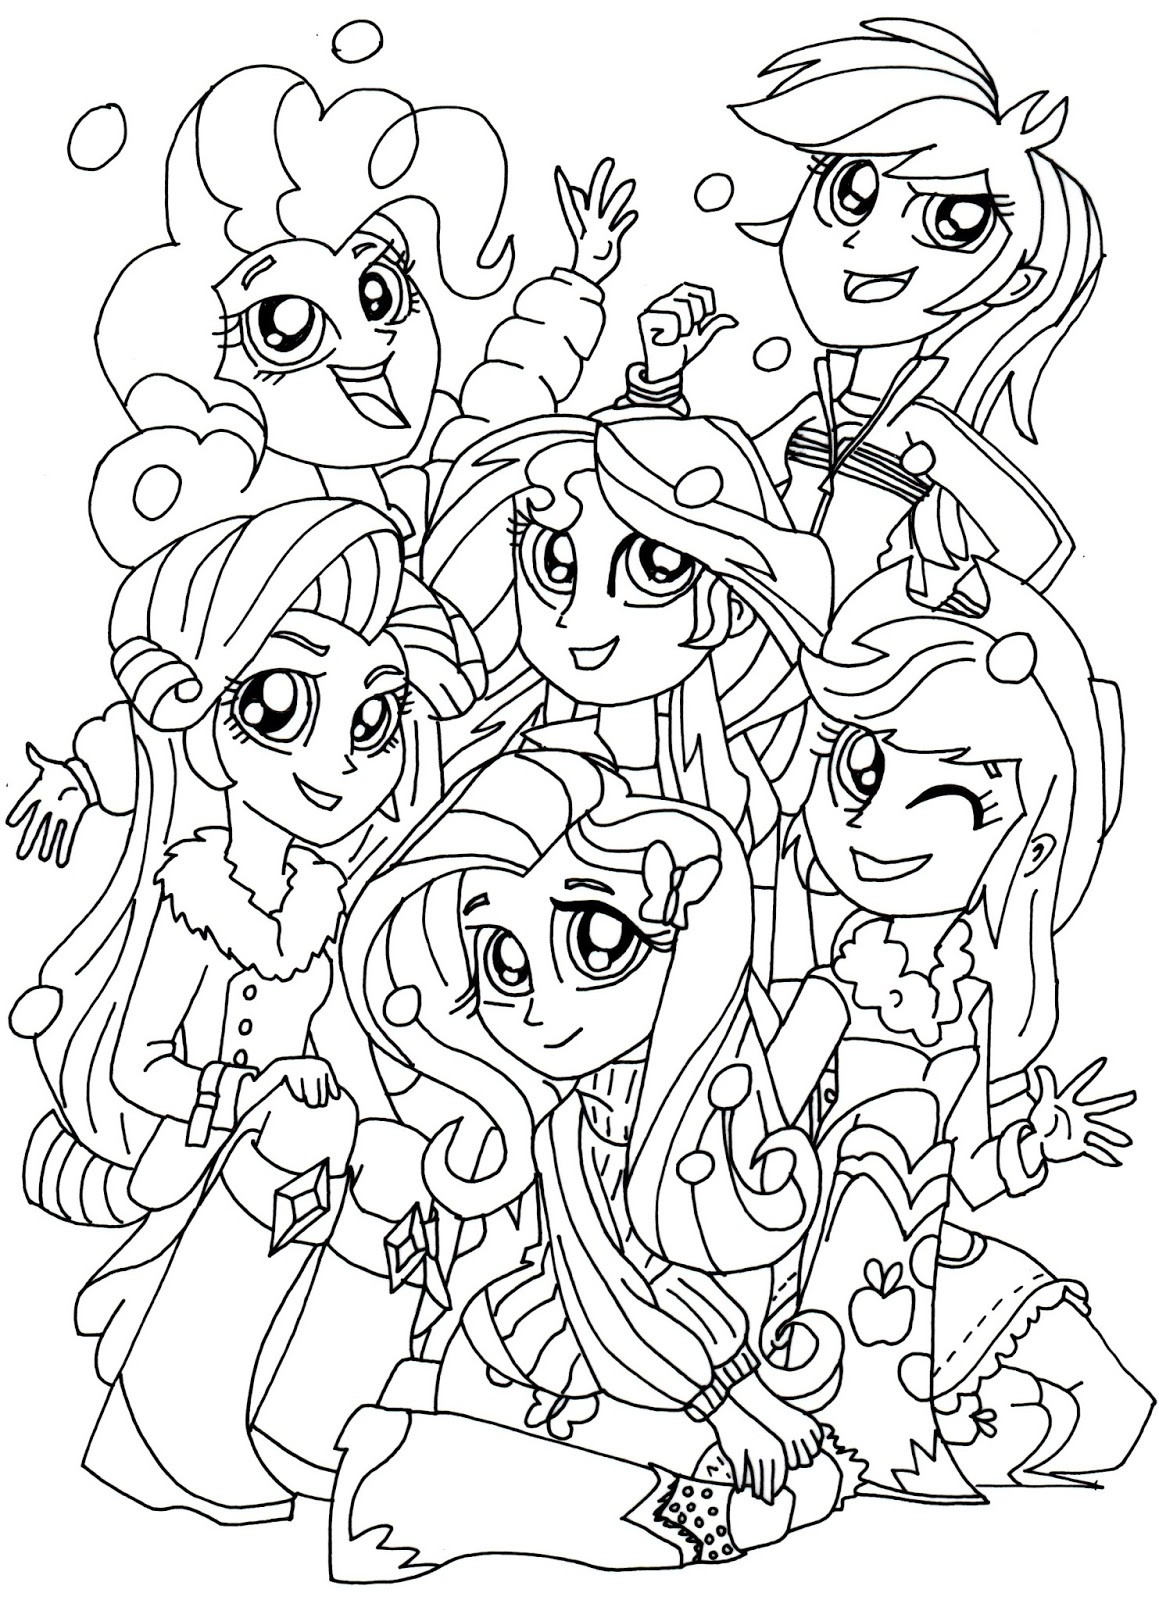 Coloring Pages Girl
 Equestria Girls Coloring Pages Best Coloring Pages For Kids